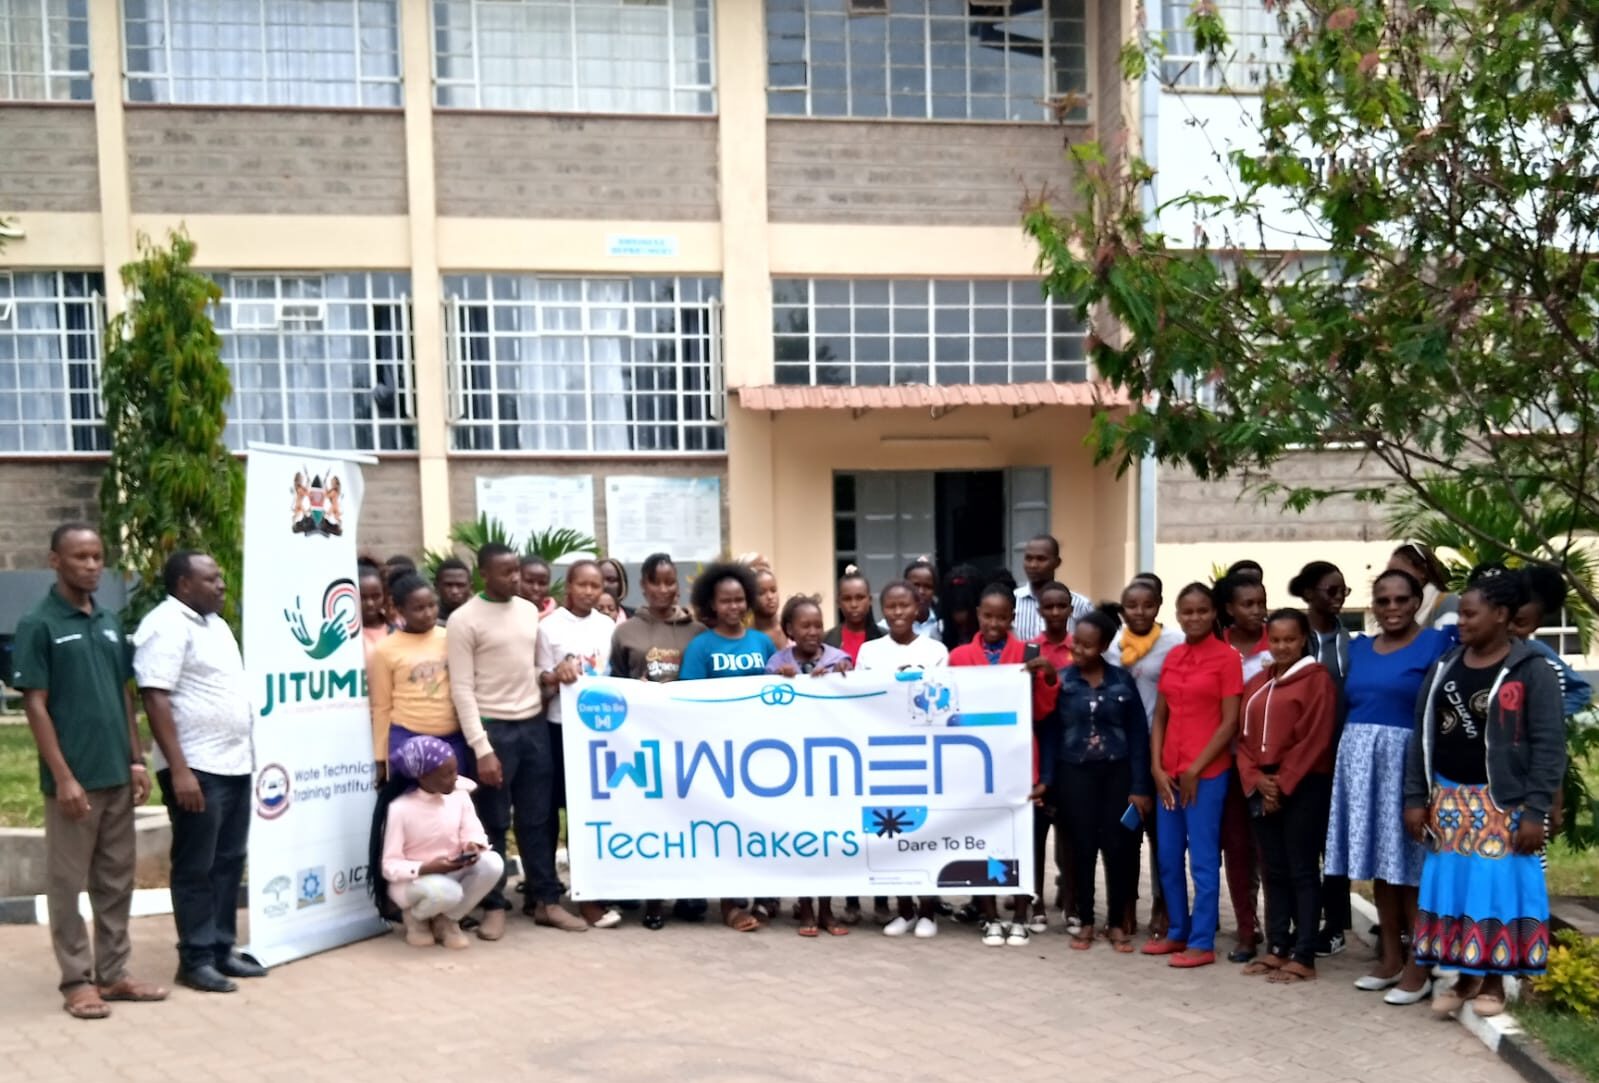 Launch event for Google Women Tech makers - Makueni at Wote Technical Training Institute. Empowerment program for girls with technology skills for innovations of solutions to local problems